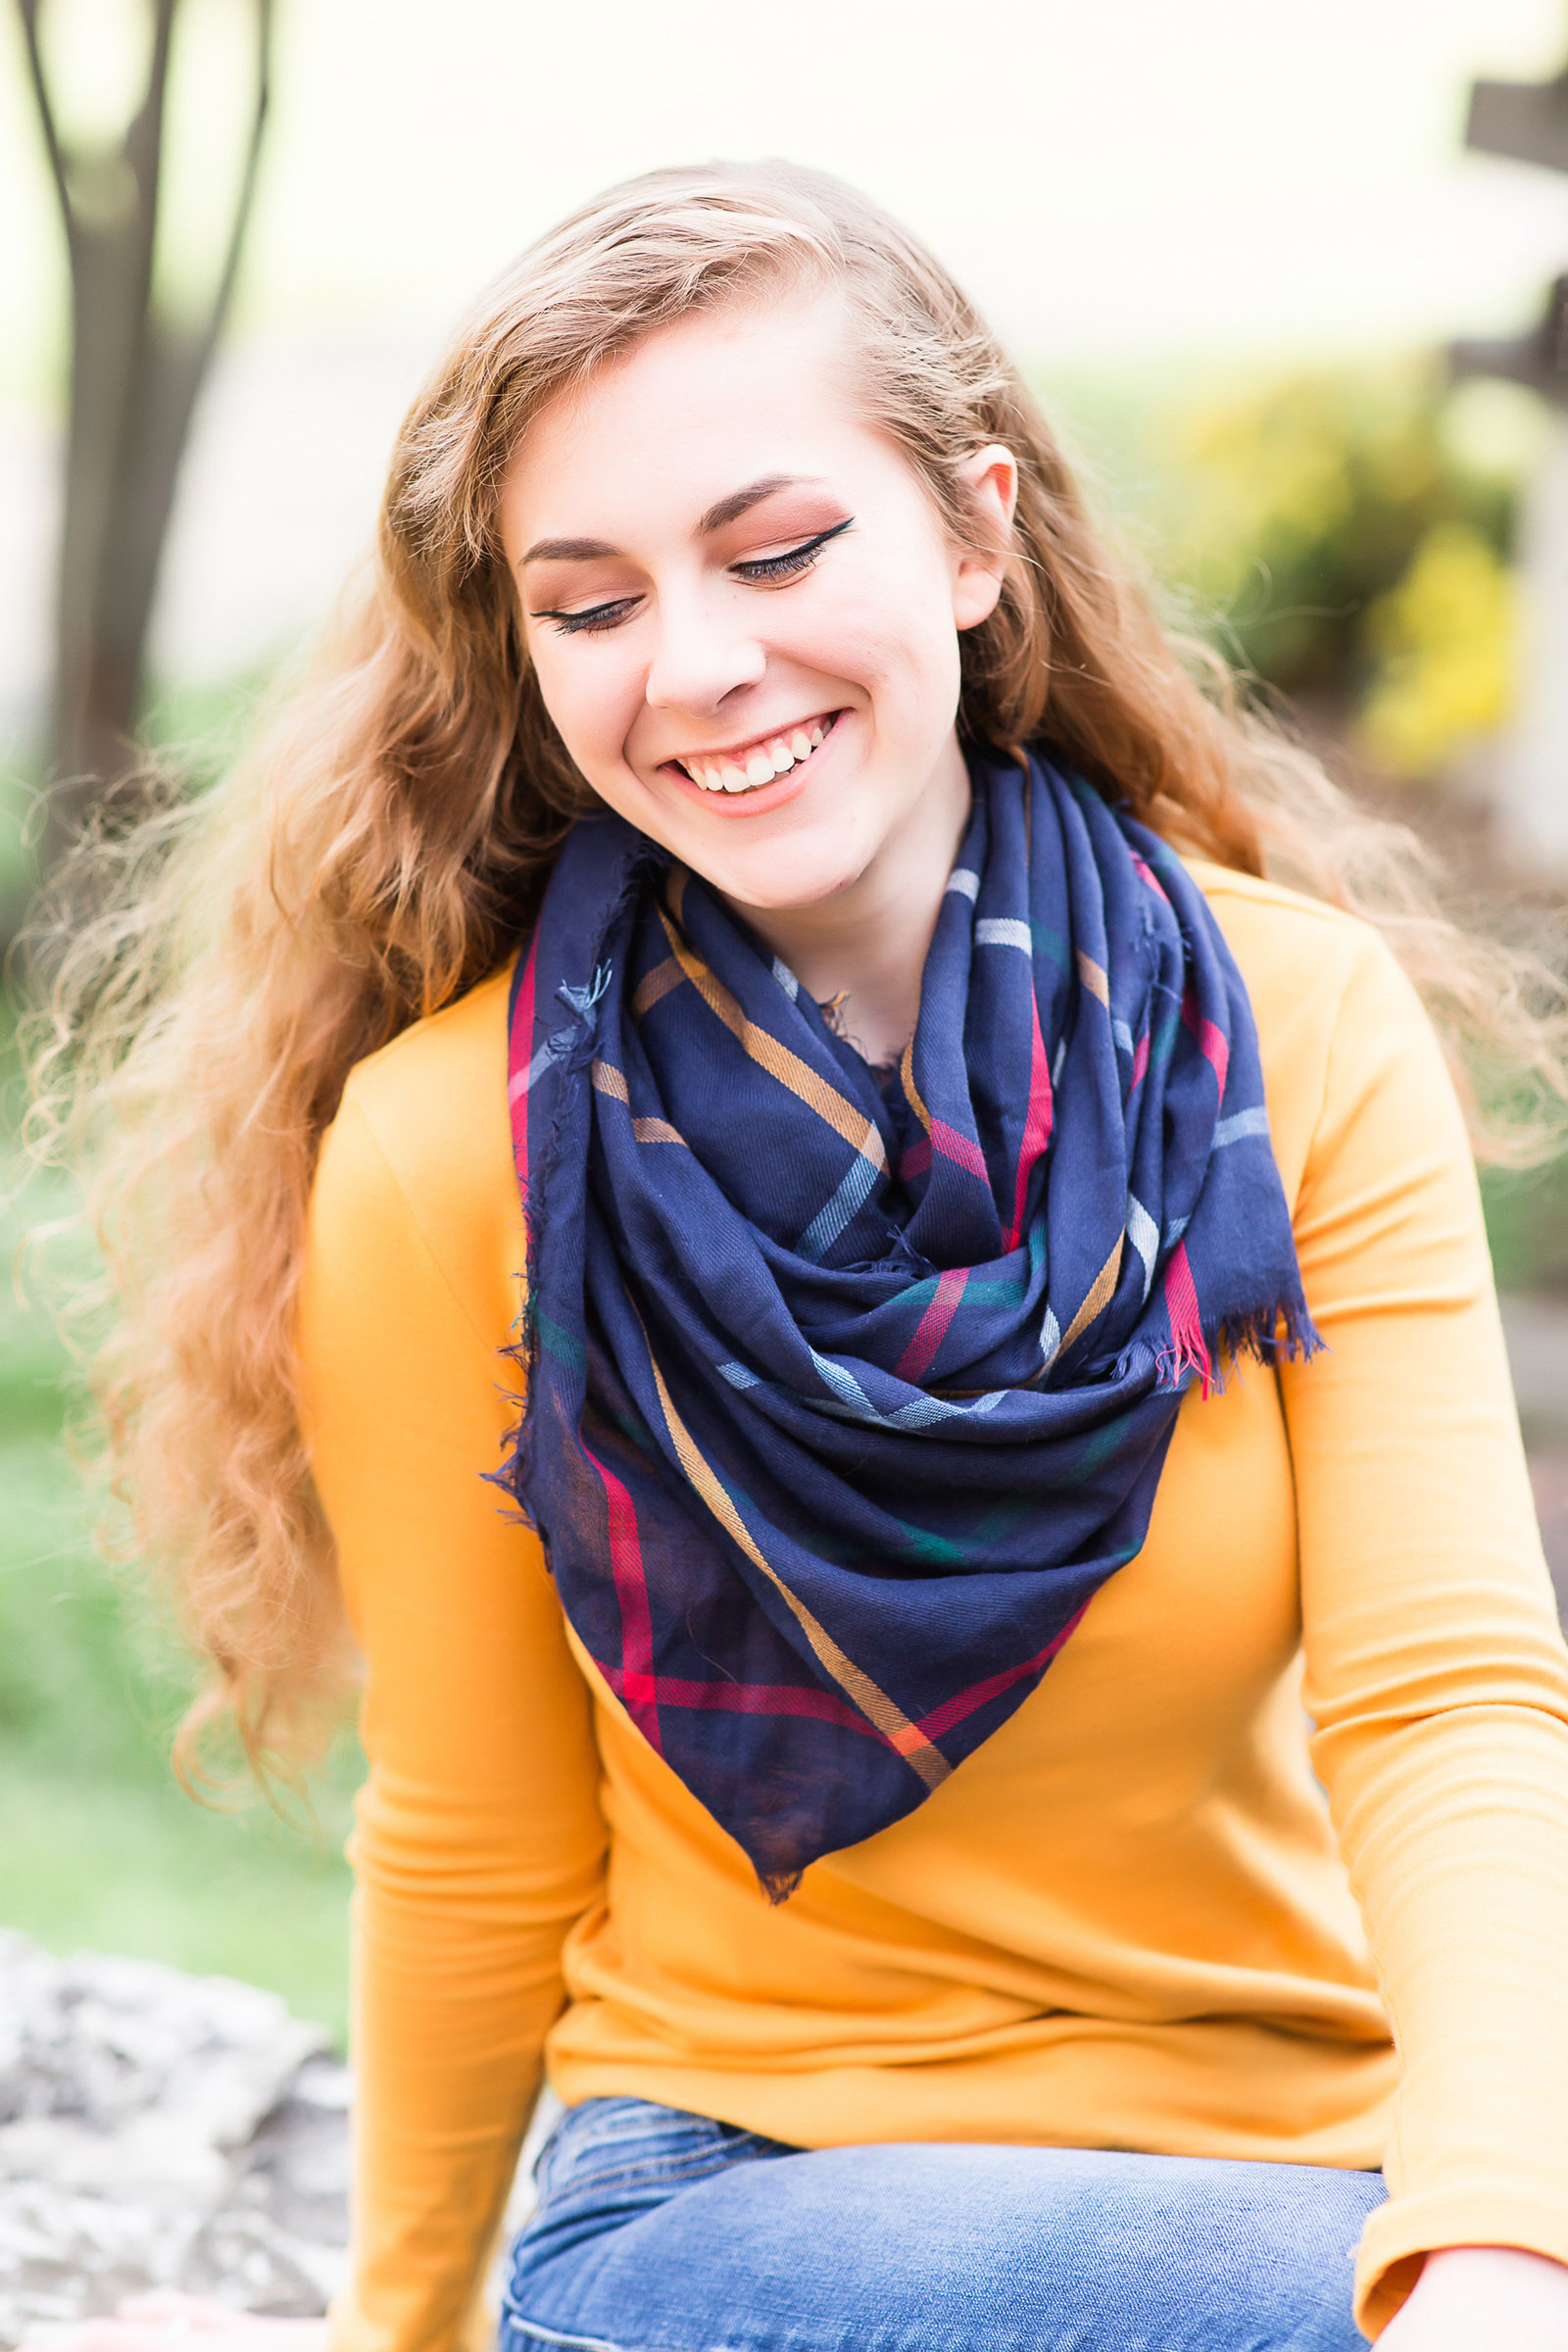 Senior girl--nature session-Bluffton, IN-TO-7450-p